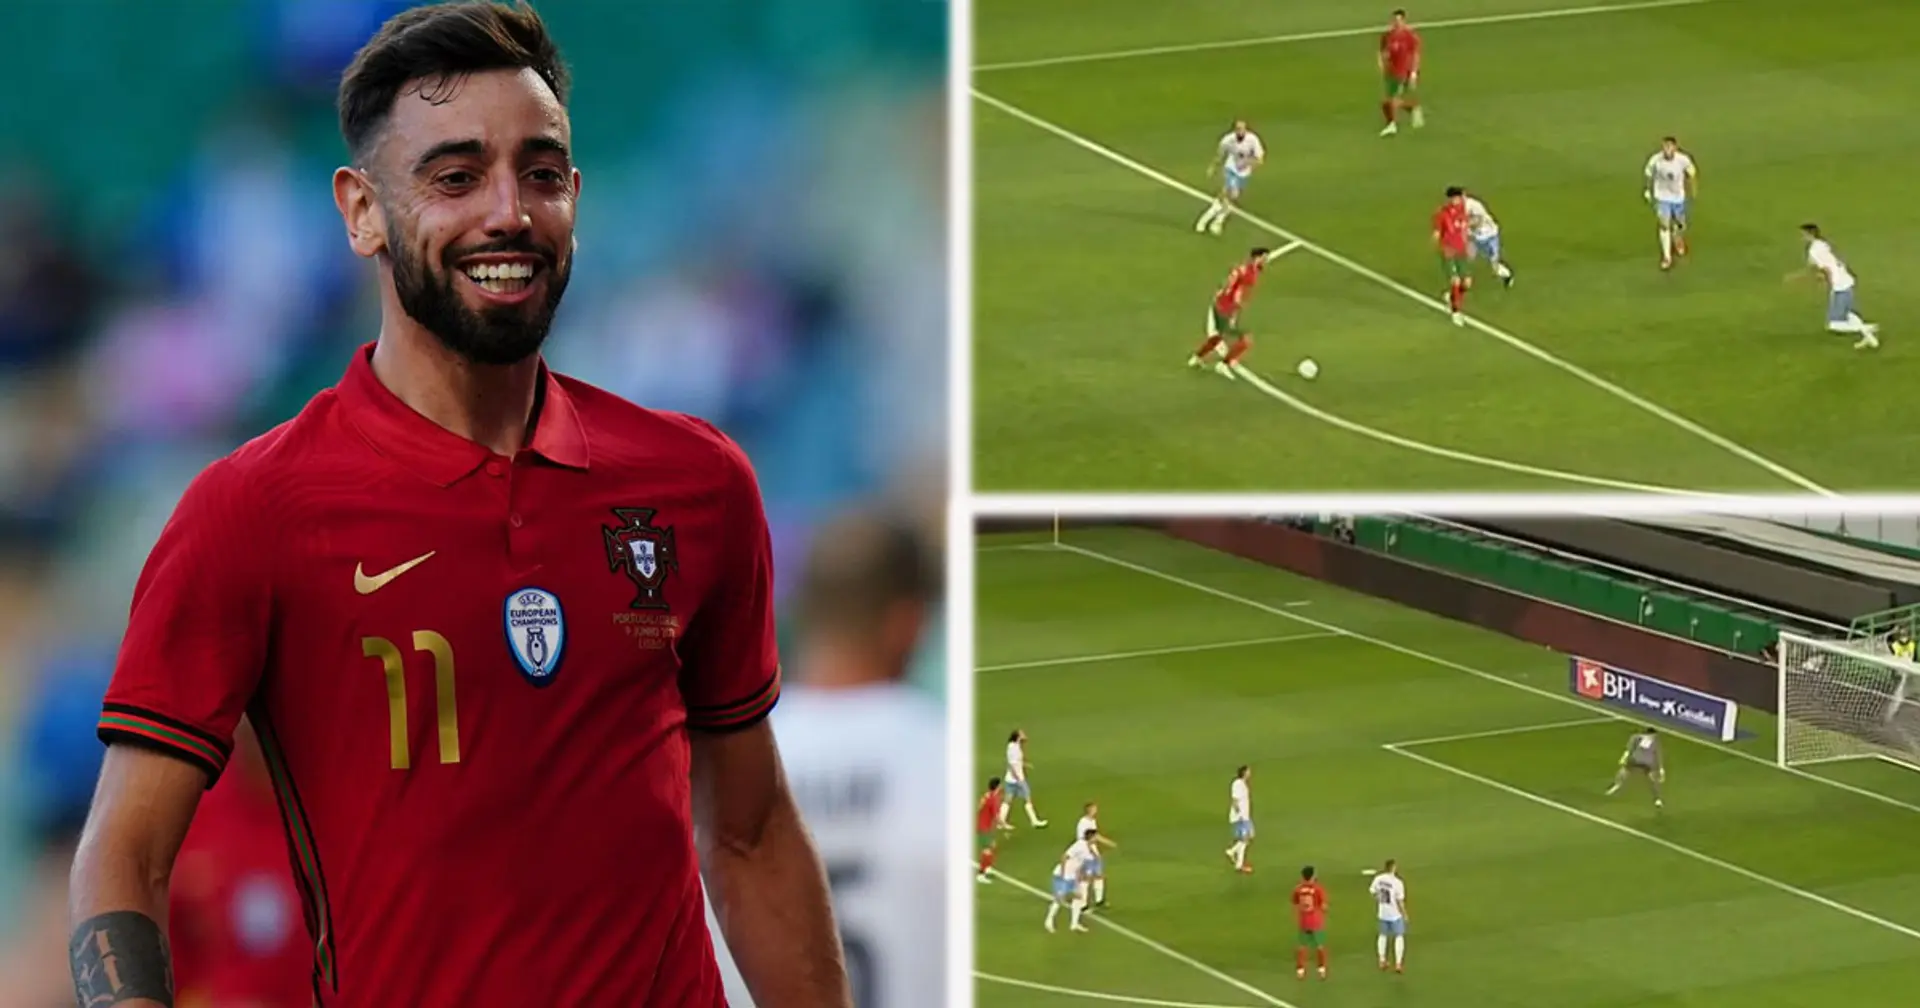 Bruno proves his class with fantastic goal for Portugal - and United fans love to see it